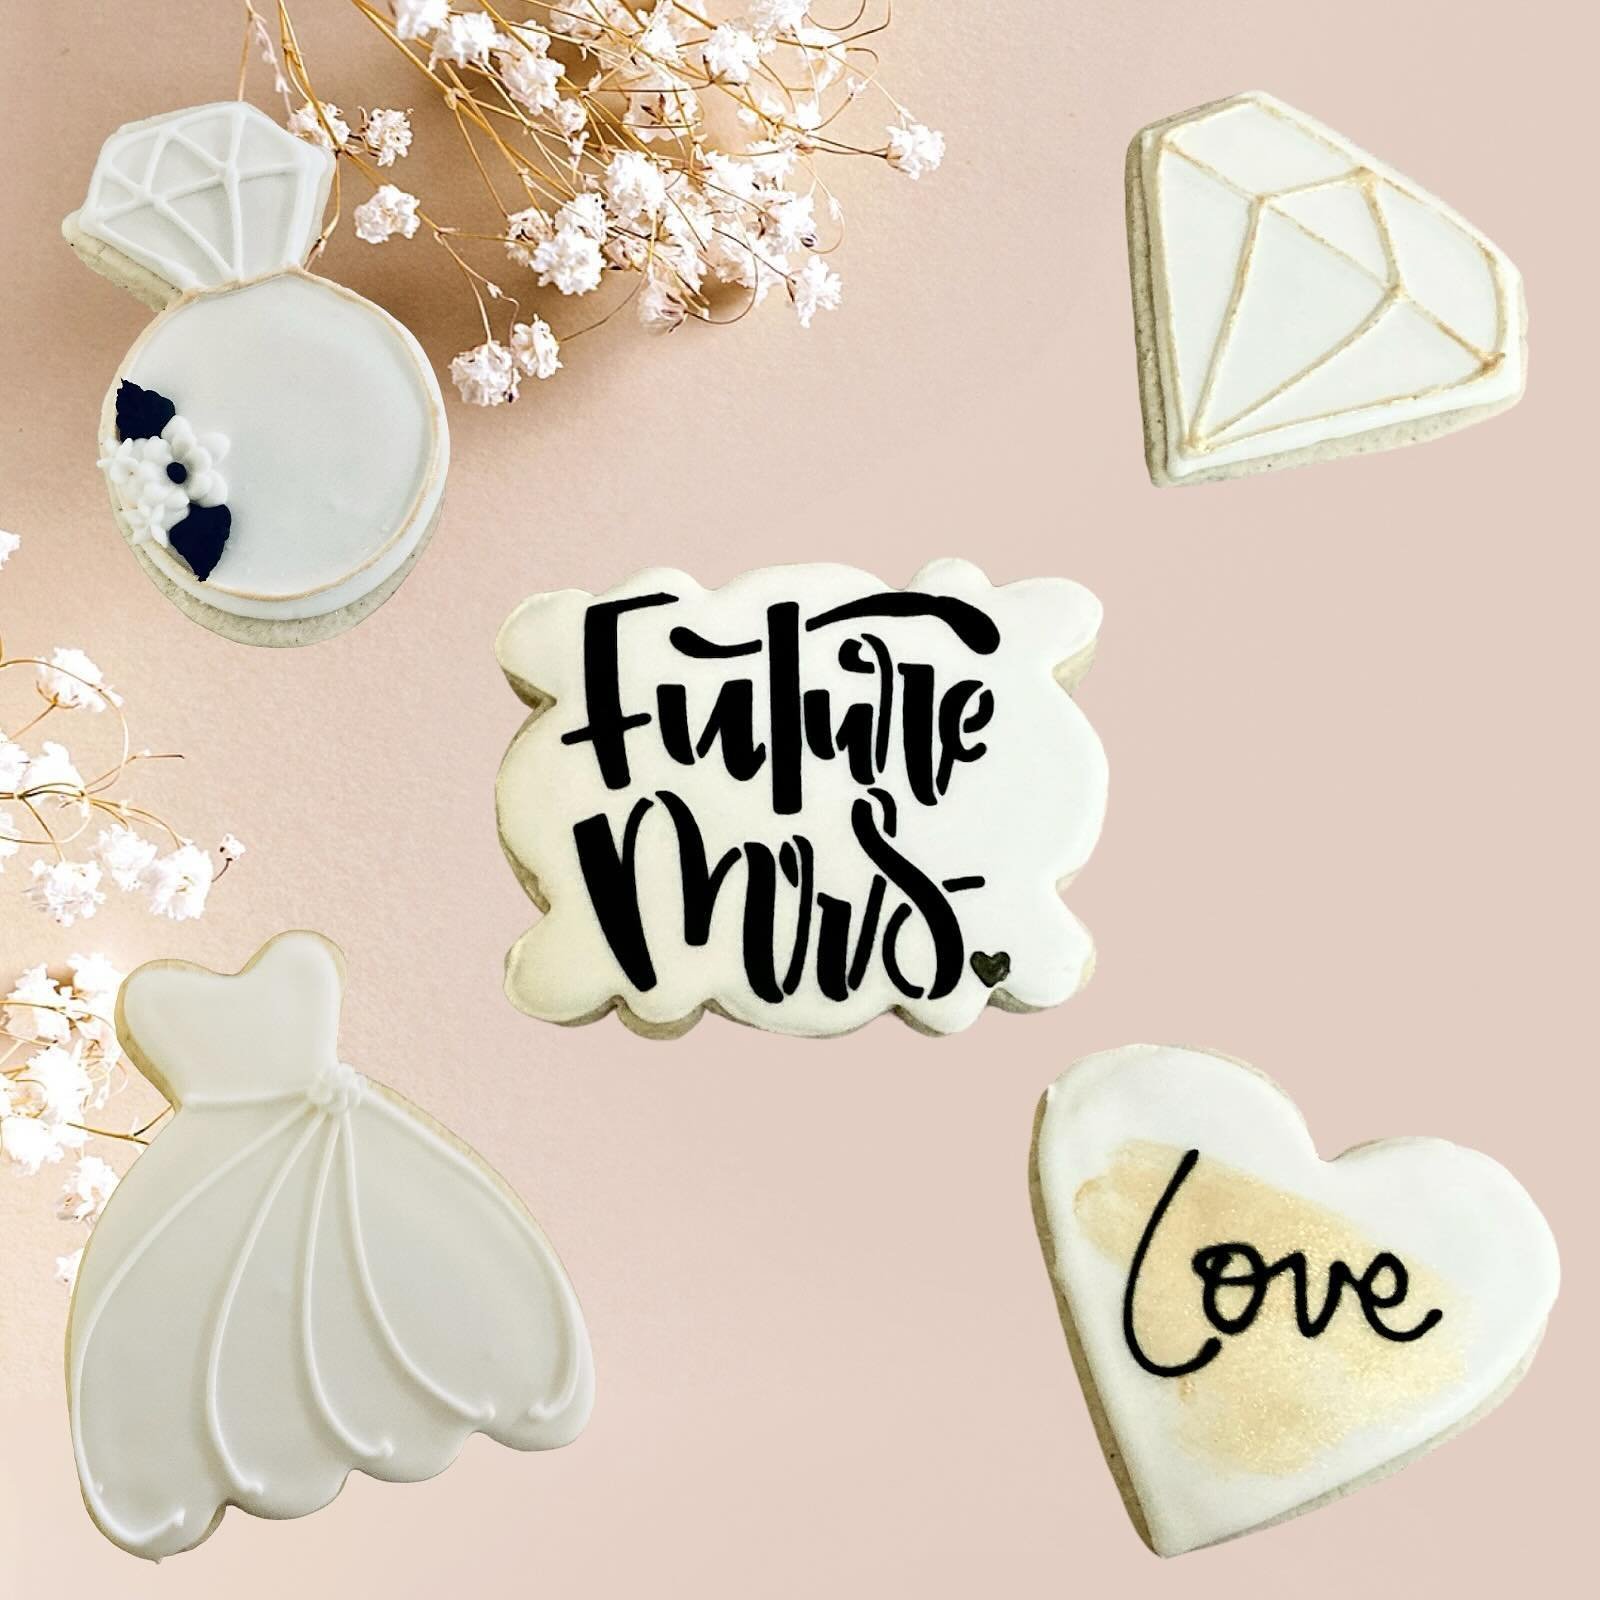 Getting Married? Or you are the Bride, we have the perfect dessert for you! Custom wedding sugar cookies! 

mamawescookies.com